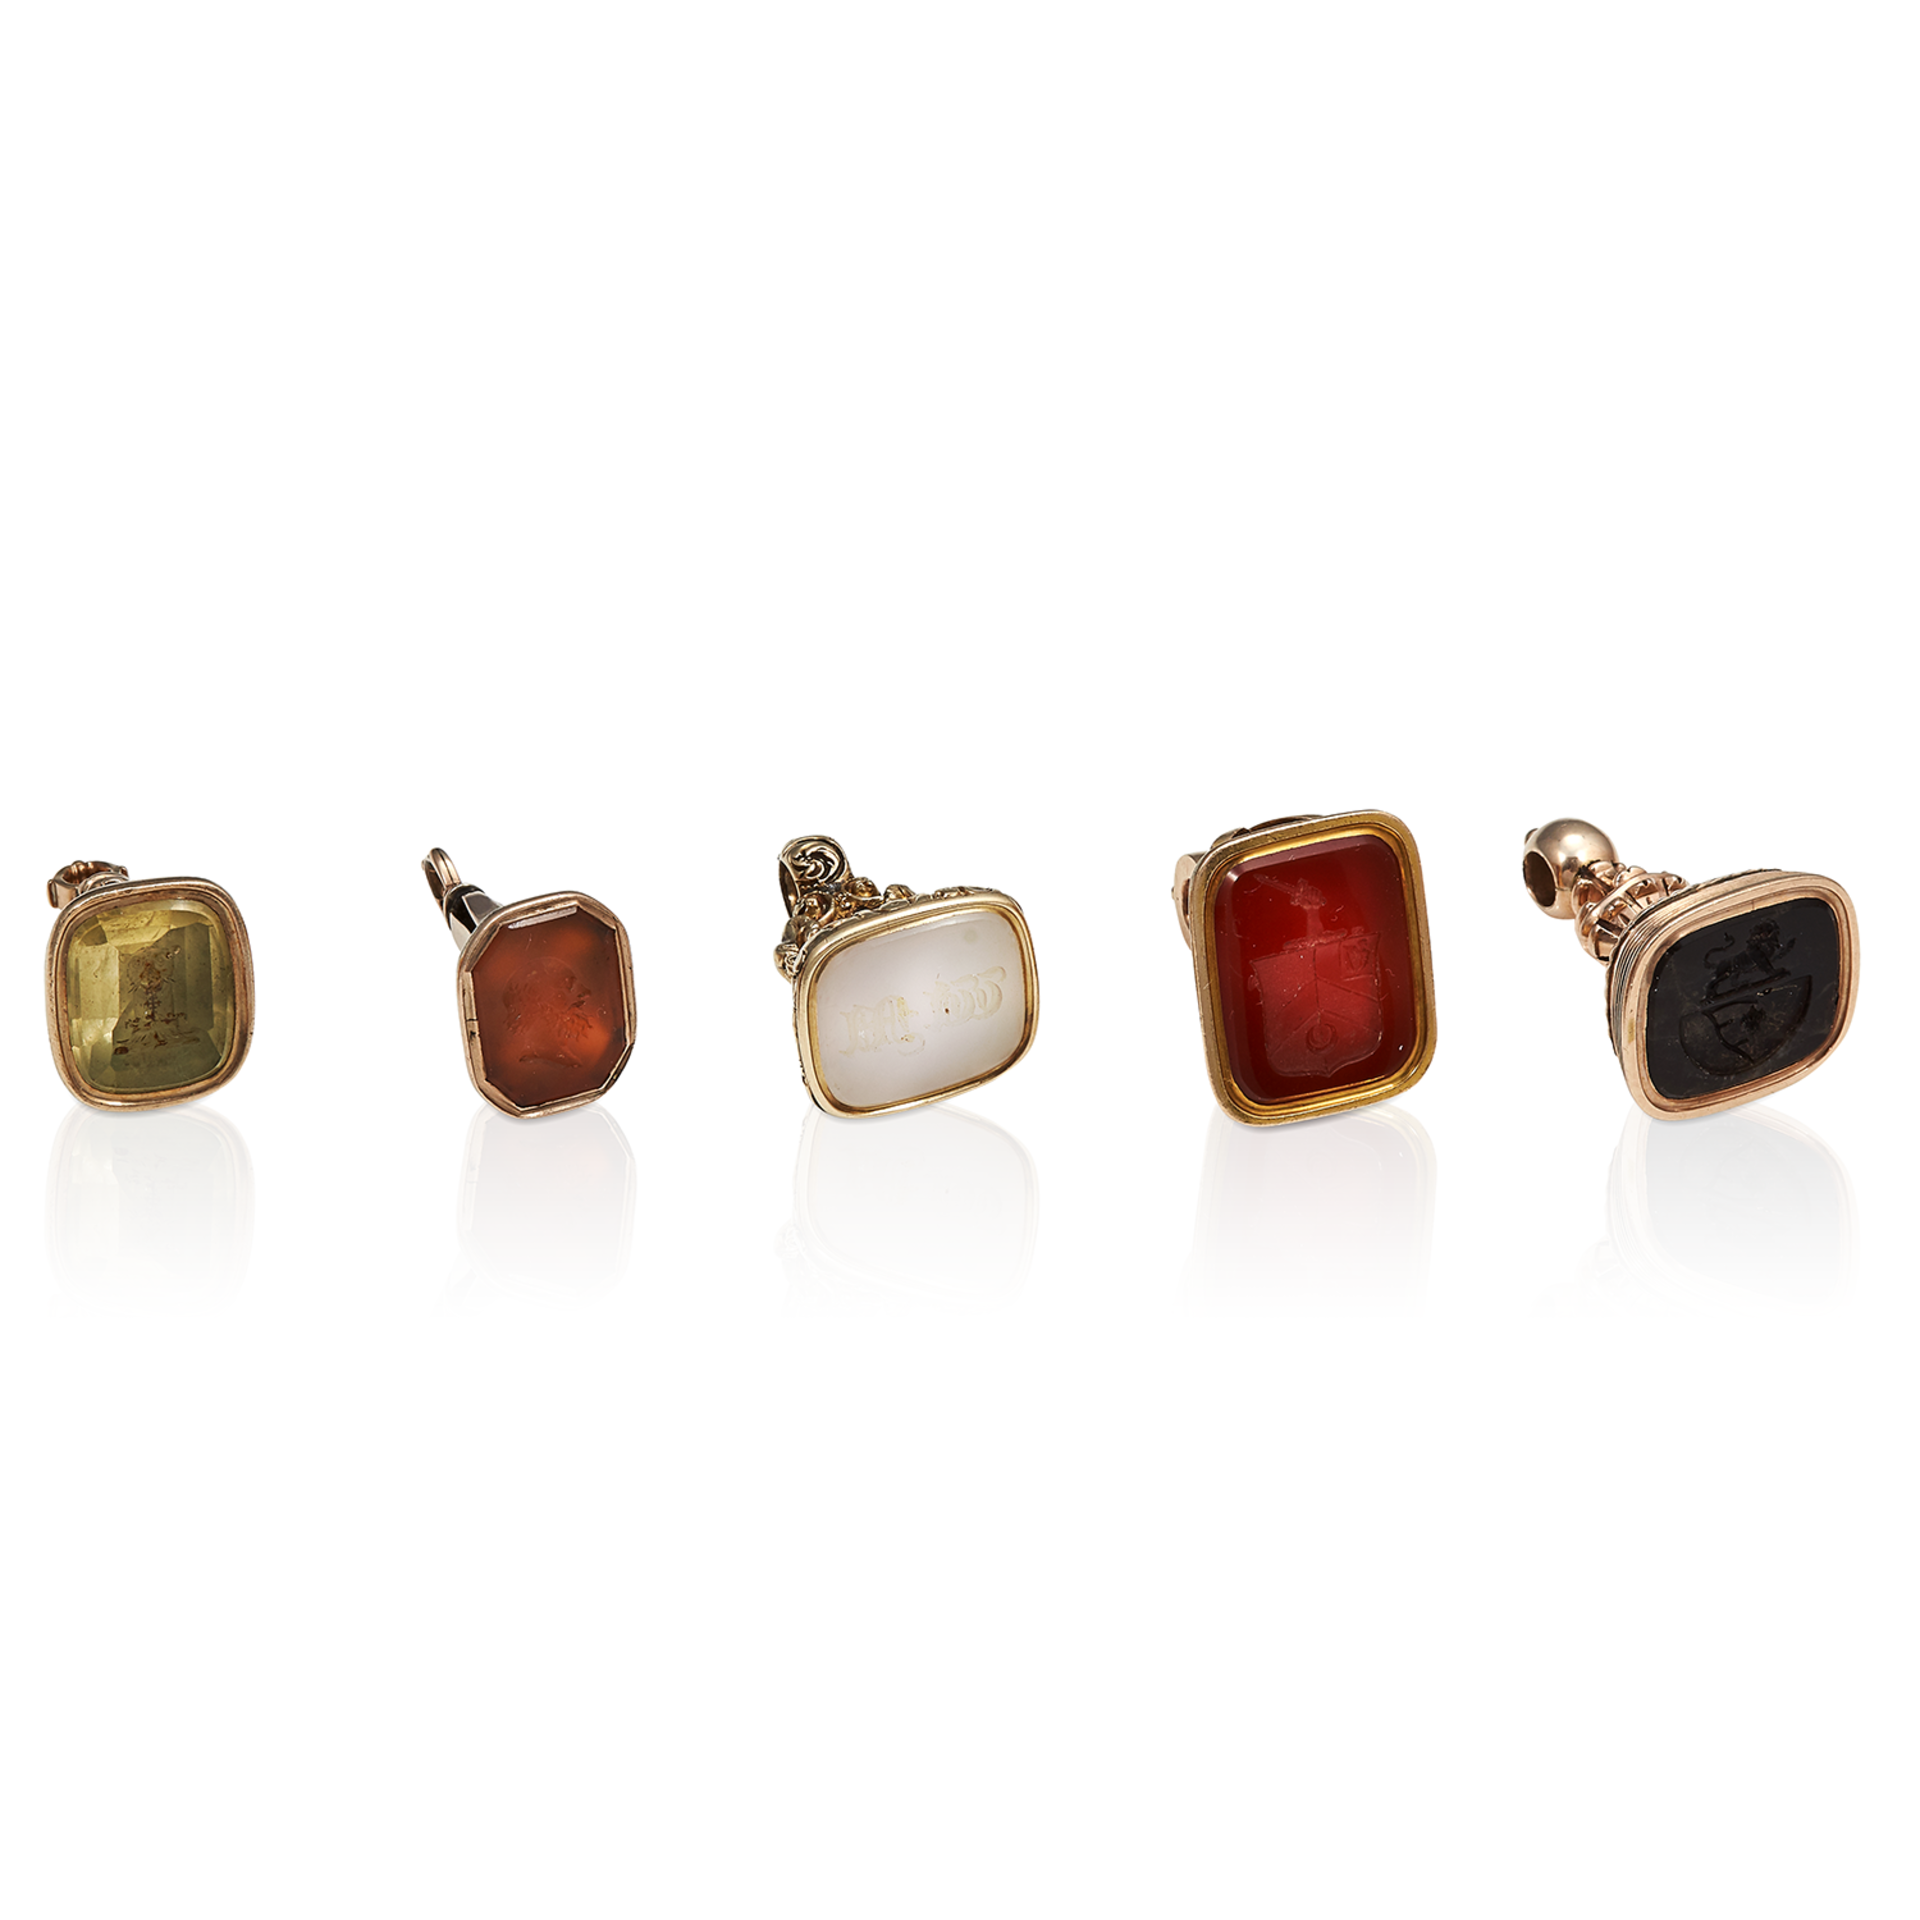 FIVE HARD STONE INTAGLIO SEALS in yellow gold, set with a range of hard-stones including